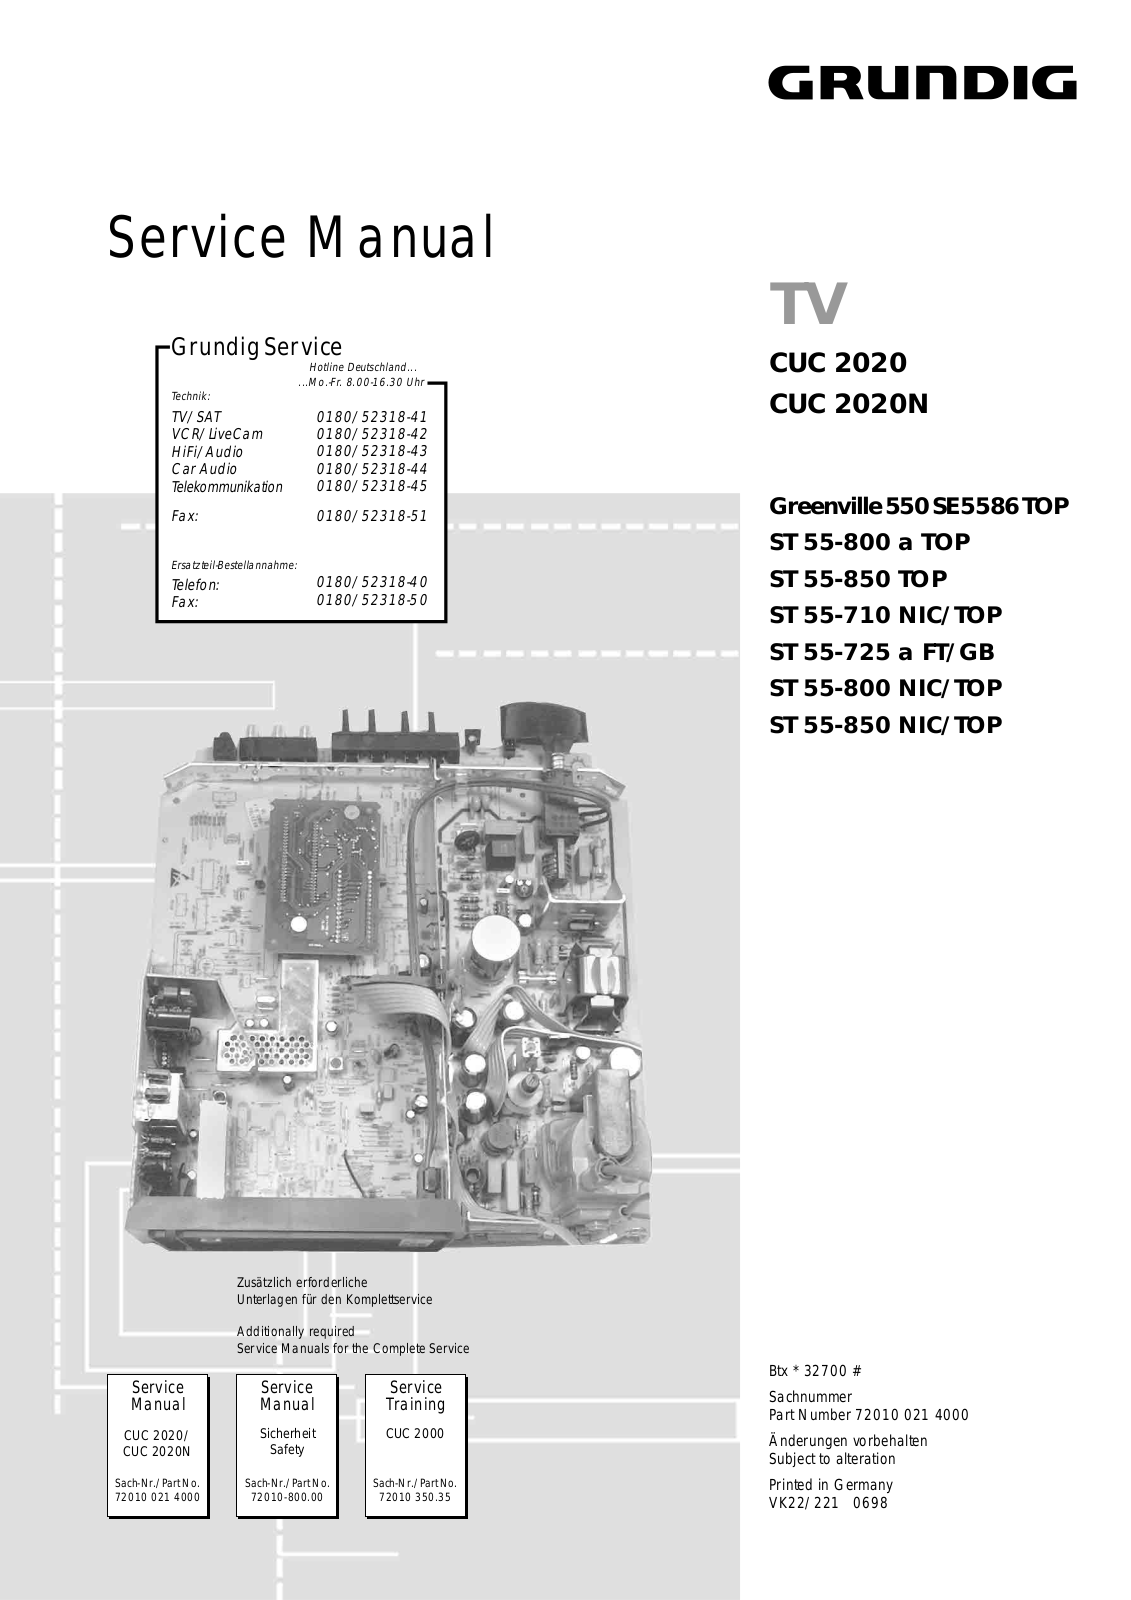 Grundig ST 55-800 NIC-TOP, ST 55-725 FT-GB, ST 55-710 NIC-TOP, ST 55-850 TOP, ST 55-800 TOP Service Manual